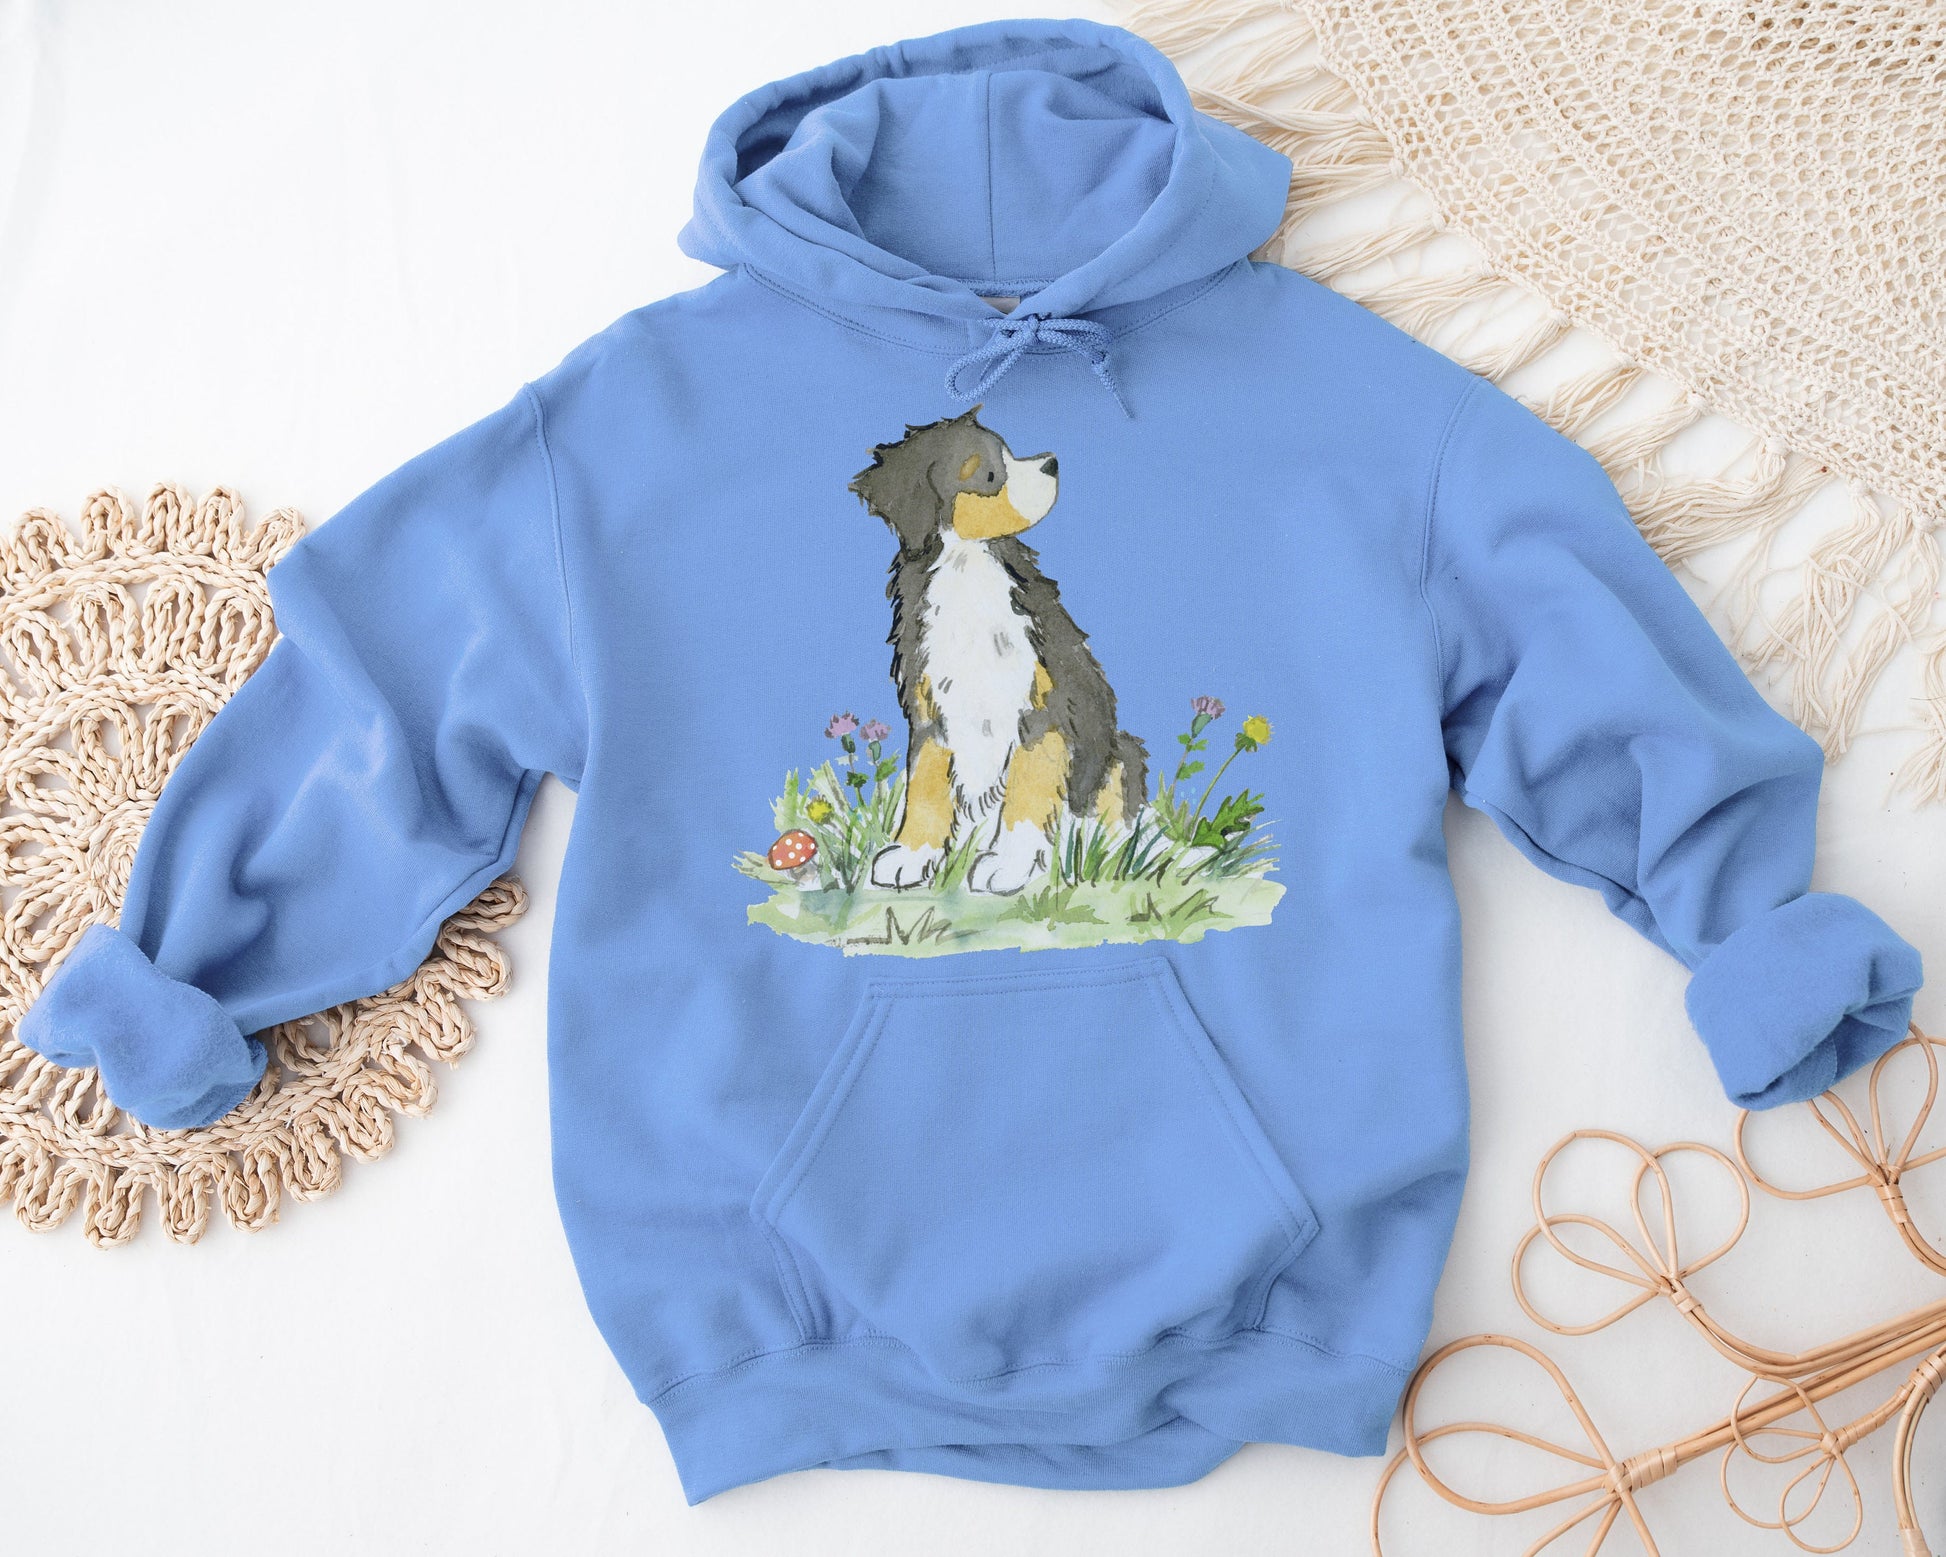 Light blue hooded sweatshirt with artwork of a Bernese Mountain Dog and Flowers on it.